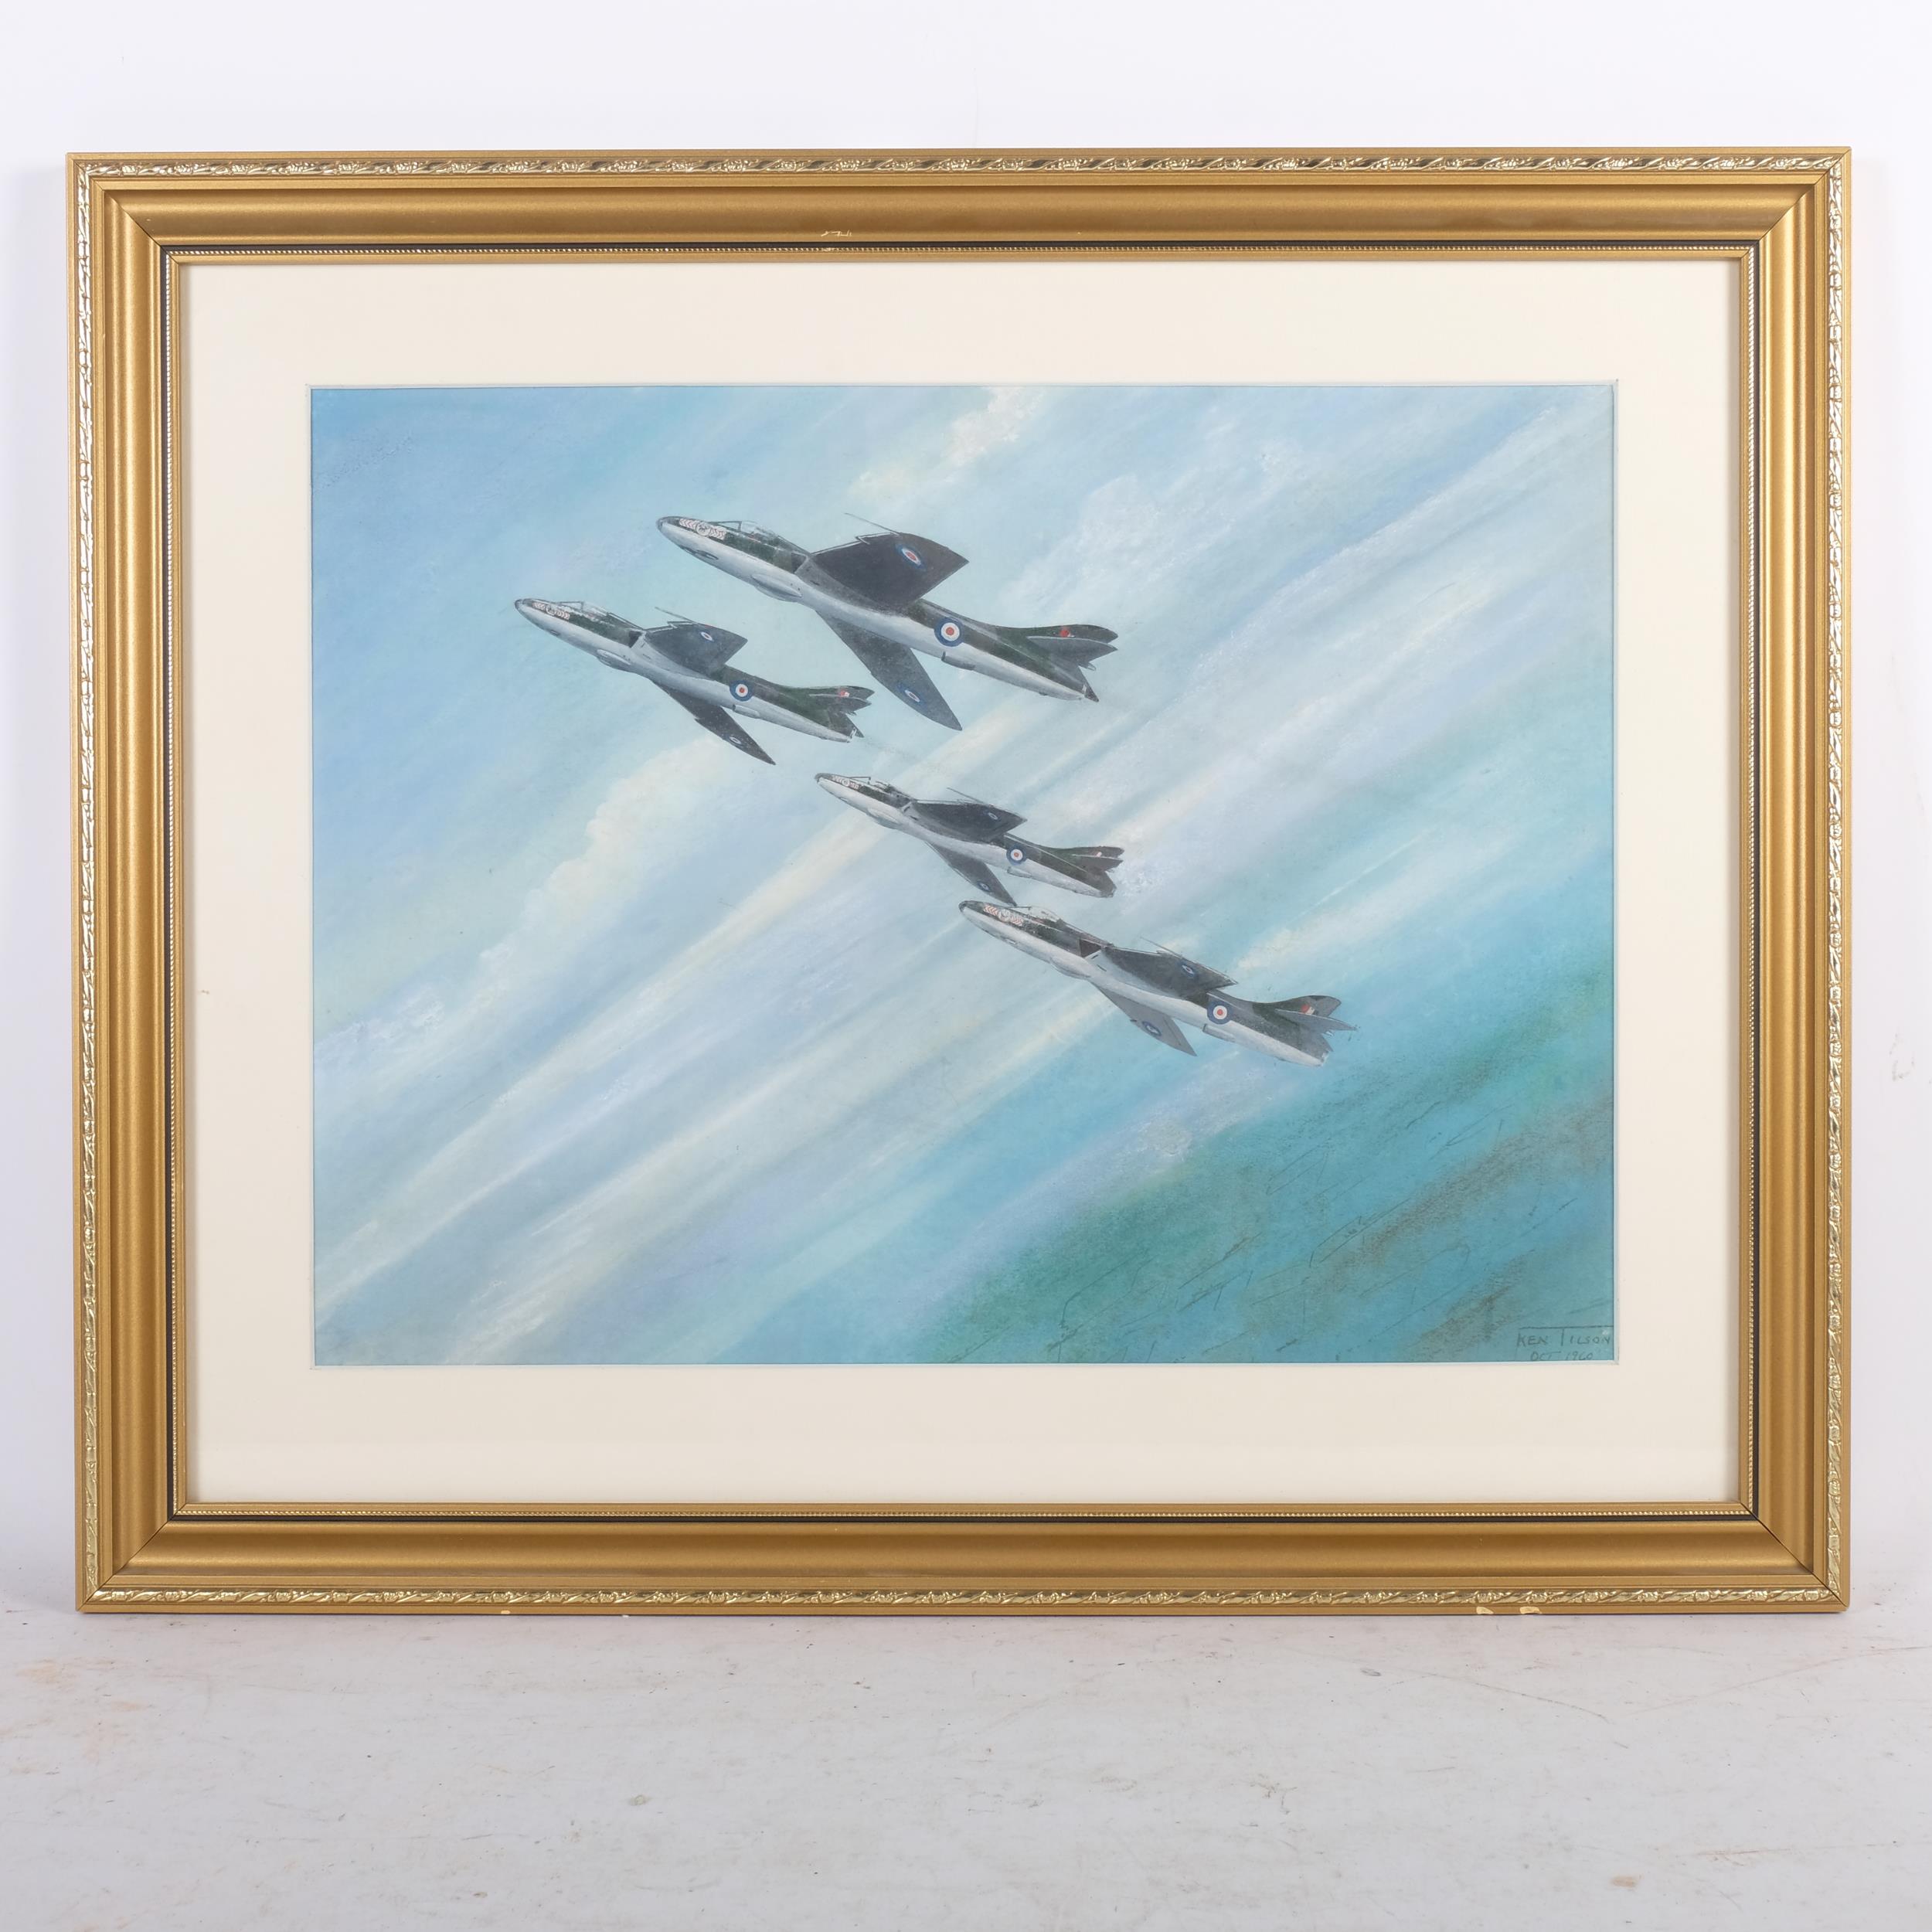 Watercolour, Westland Wyvern 4 approaching HMS Eagle, framed, 40cm x 68cm overall, Ken Tilson, study - Image 2 of 2